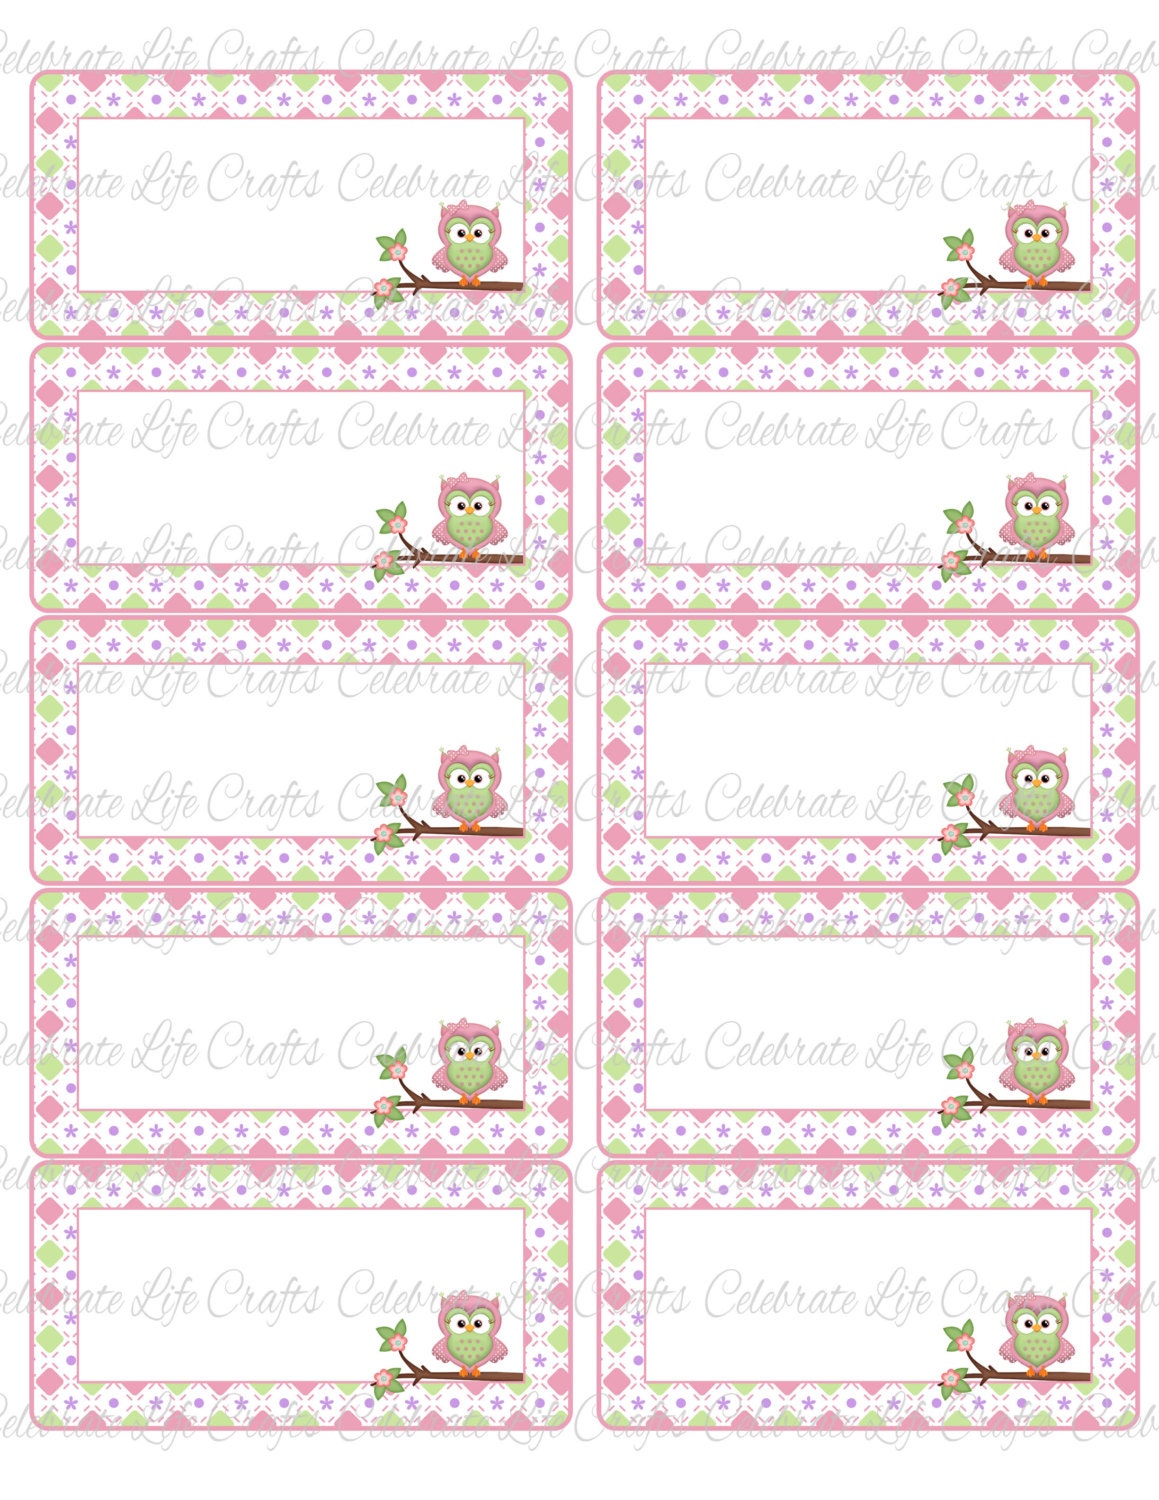 Baby Shower Printable Name Tag Labels by CelebrateLifeCrafts